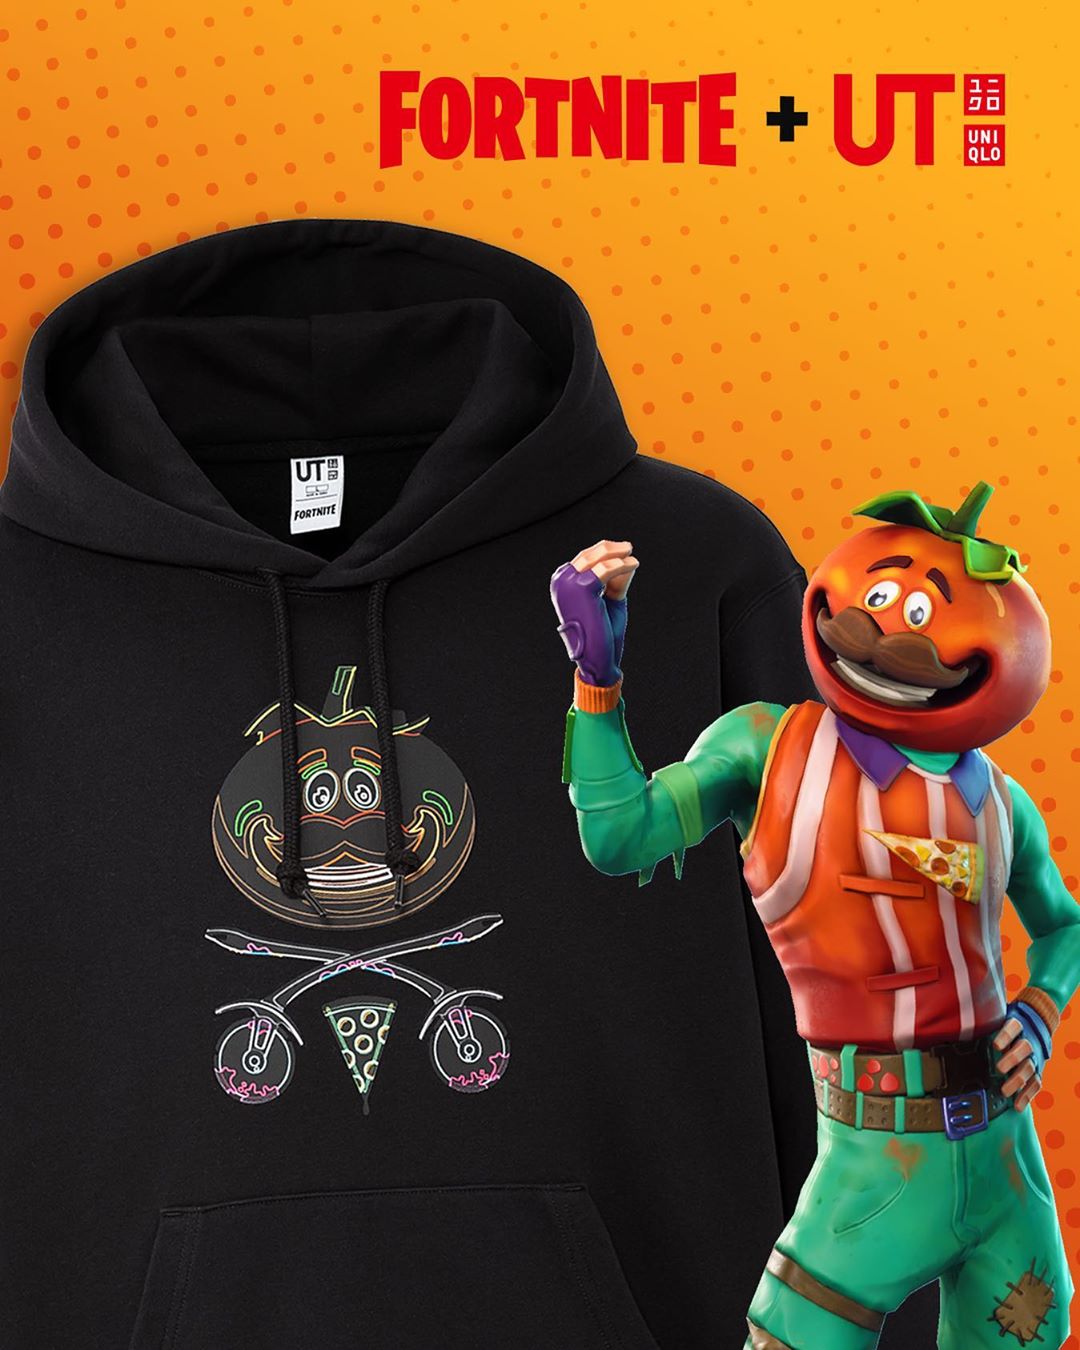 Uniqlo ユニクロ First Look At The Fortnite Ut Line Up Dropping In Stores This December Fort Ciao Nihon